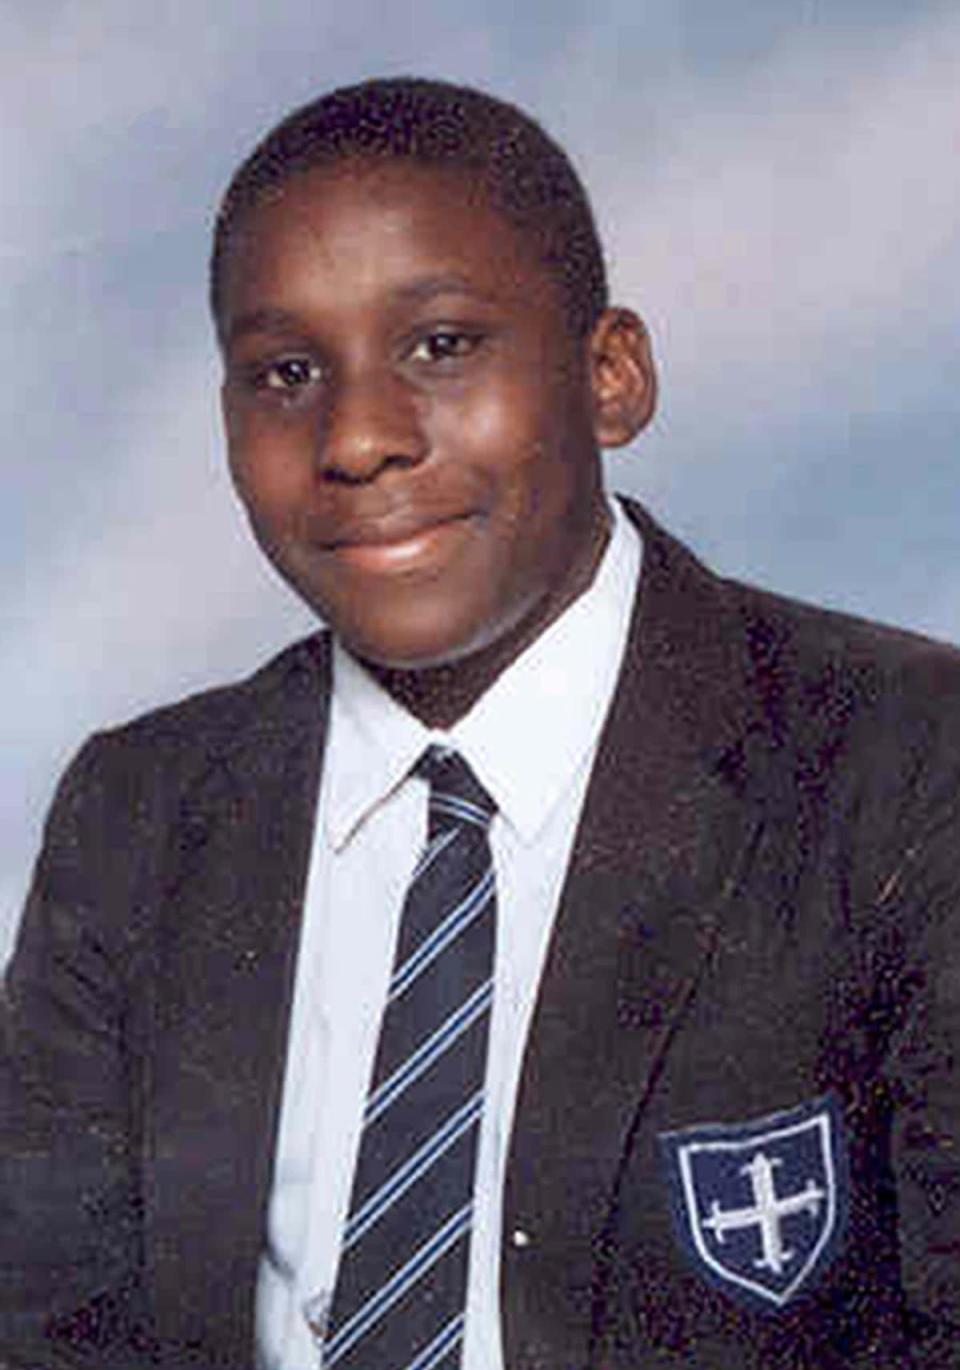 Anthony Walker was attacked and killed in a Merseyside park (Merseyside Police/PA) (PA Media)